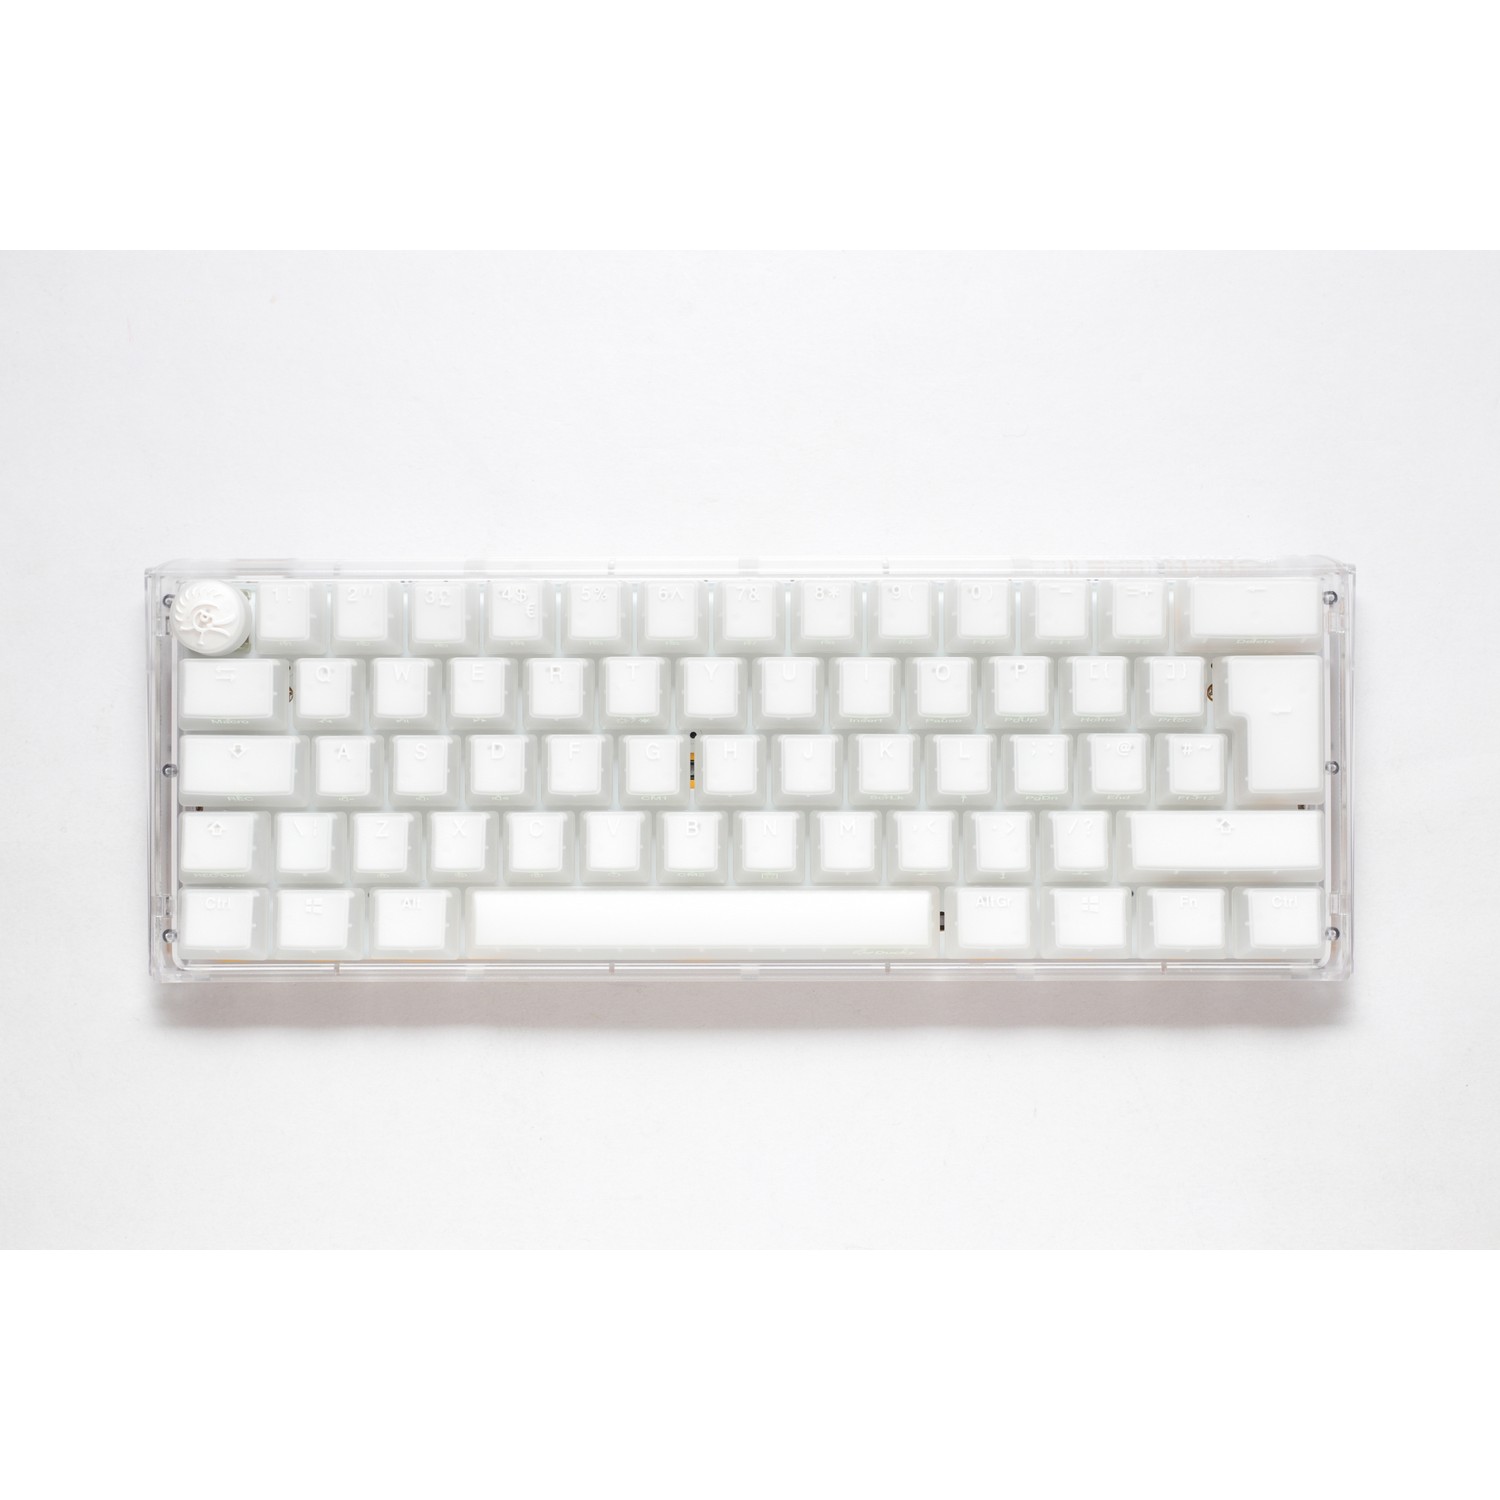 Ducky - Ducky One 3 Aura Mini 60% Mechanical Gaming Keyboard White Frame UK Layout Kailh Box Jellyfish Switch Y